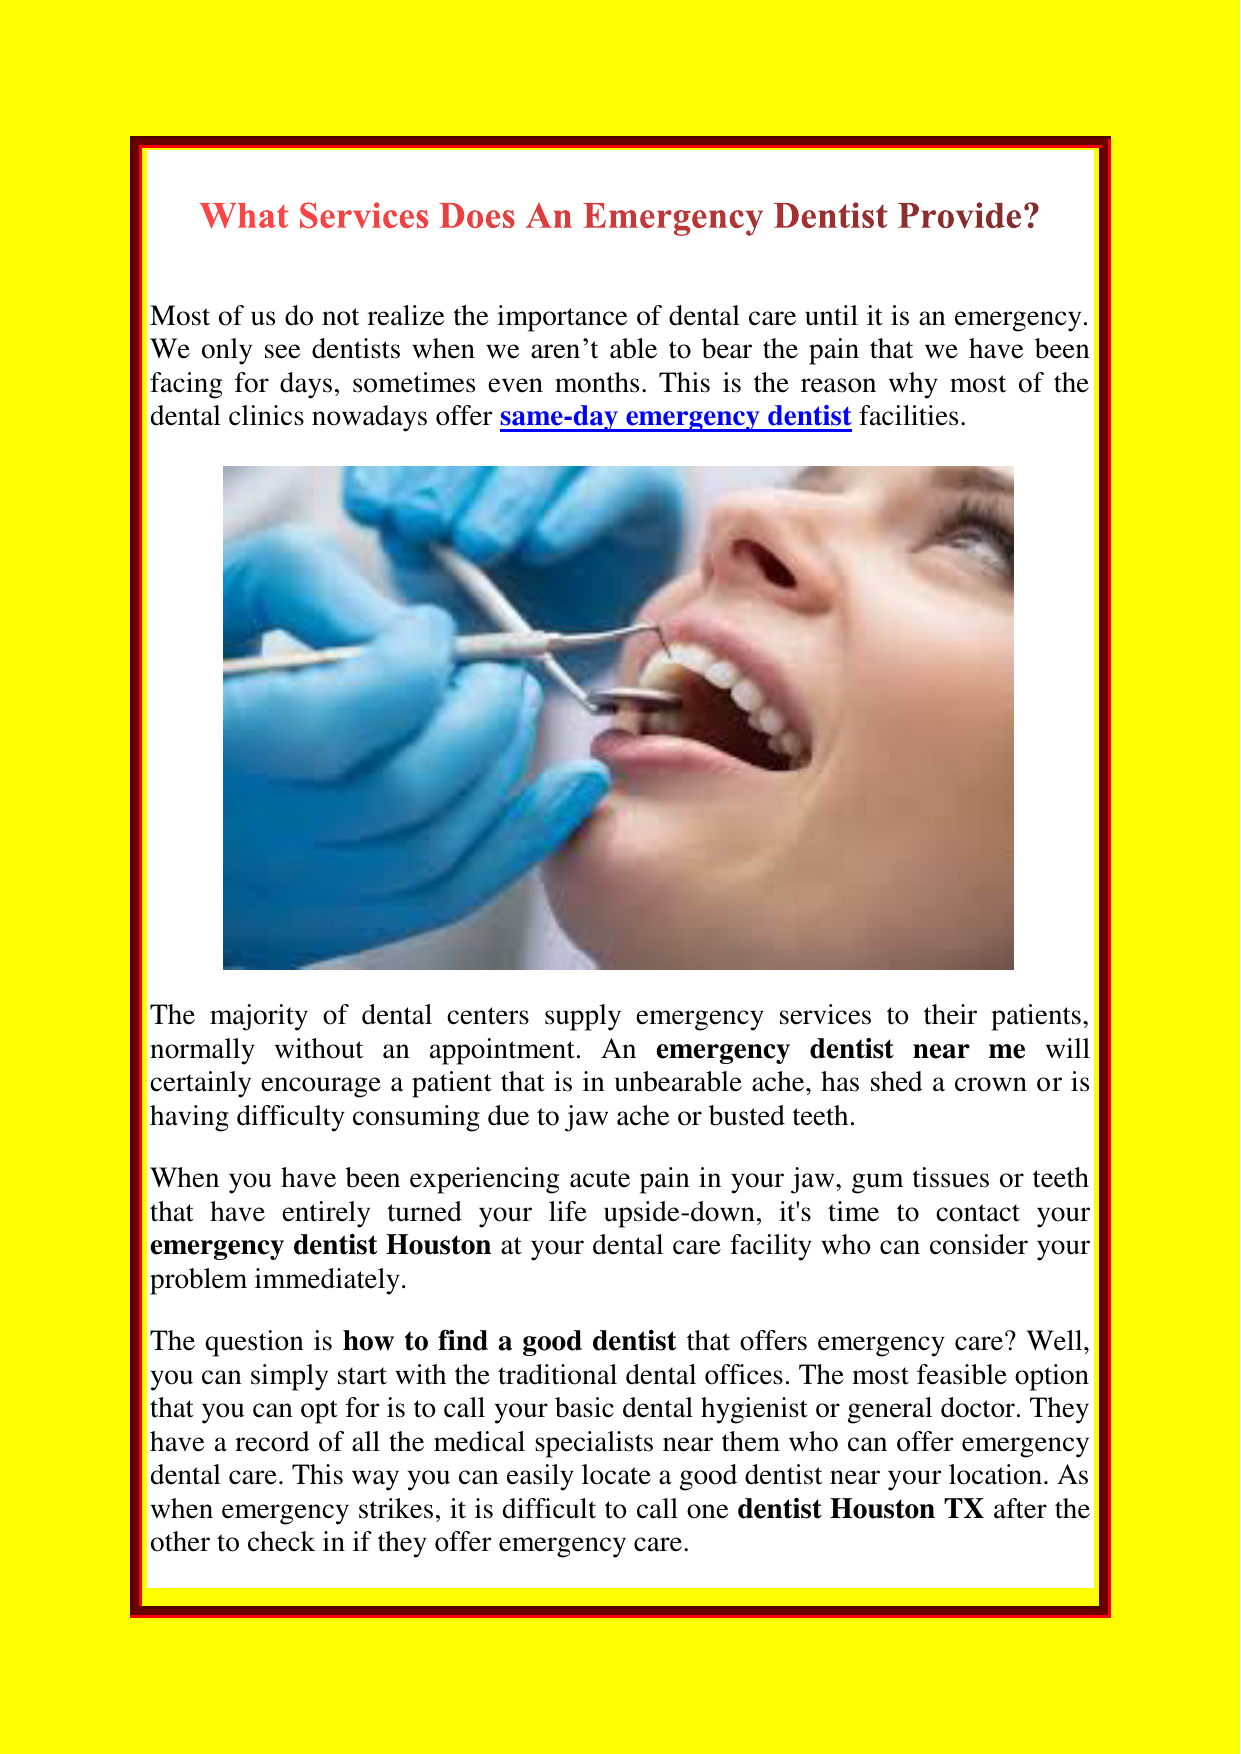 dentist<br>teeth whitening<br>dentist near me<br>root canal<br>pediatric dentist<br>orthodontist<br>dental insurance<br>veneers<br>braces<br>wisdom teeth<br>emergency dentist<br>dental implants<br>cosmetic dentistry<br>tooth extraction<br>dental clinic